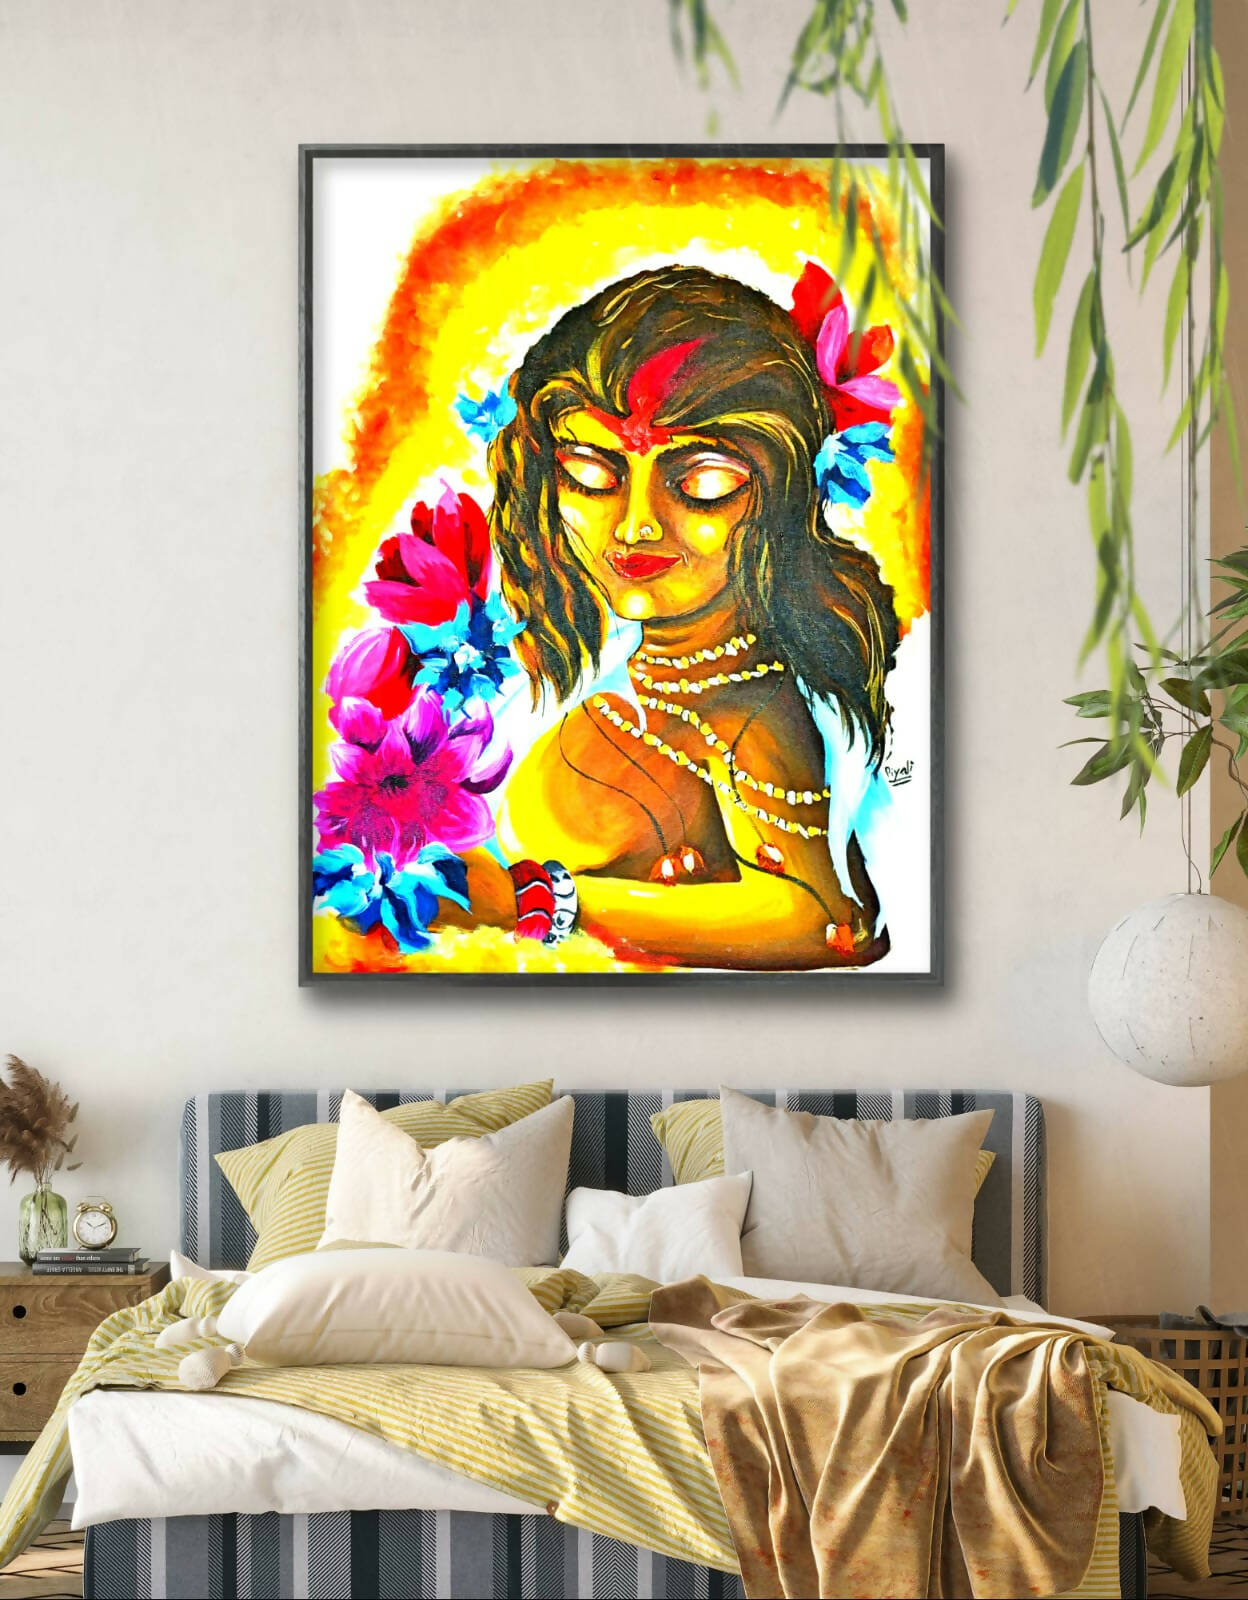 Ablaze with Love Bride Bride Portrait with Lotus Flowers Home Decor Wall Art 32x24 Inch Rolled Canvas Acrylic Painting Ablaze with Love amazon handmade decor